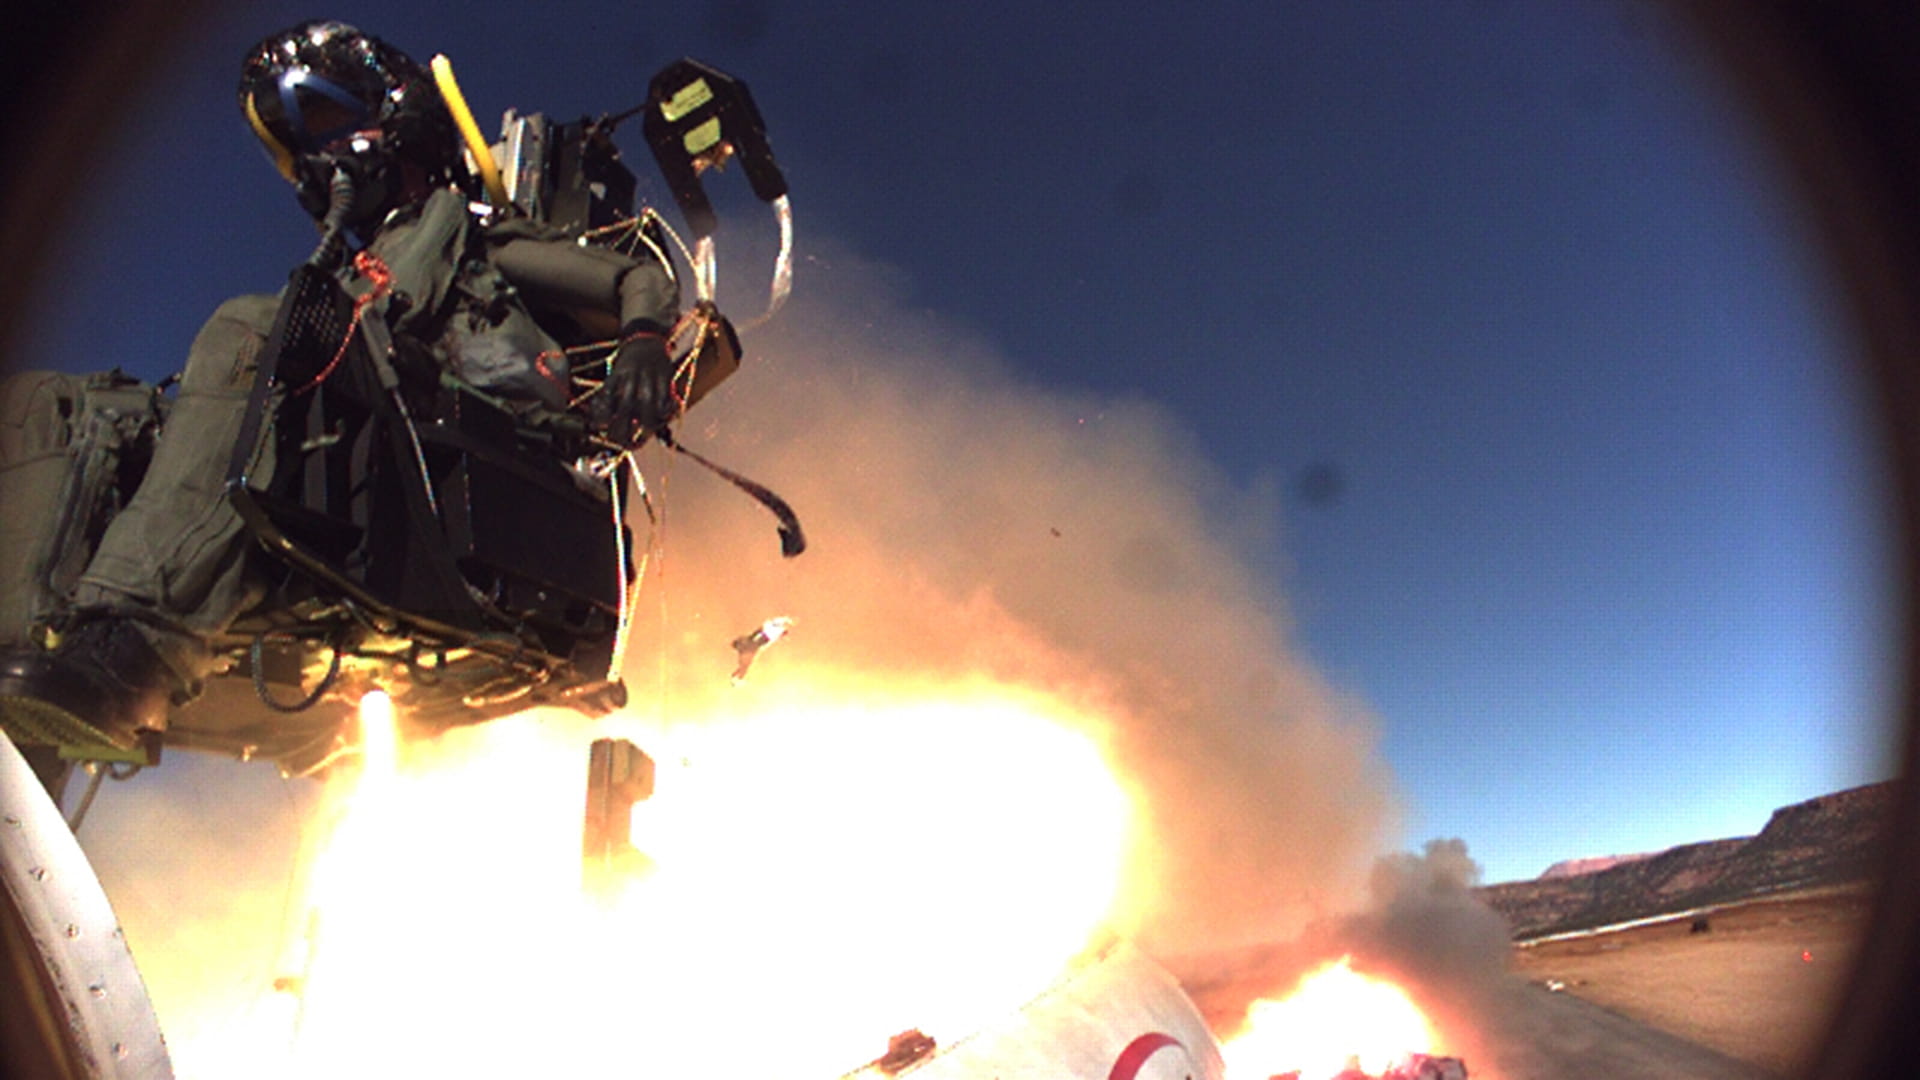 ACES 5 ejection seat deploying